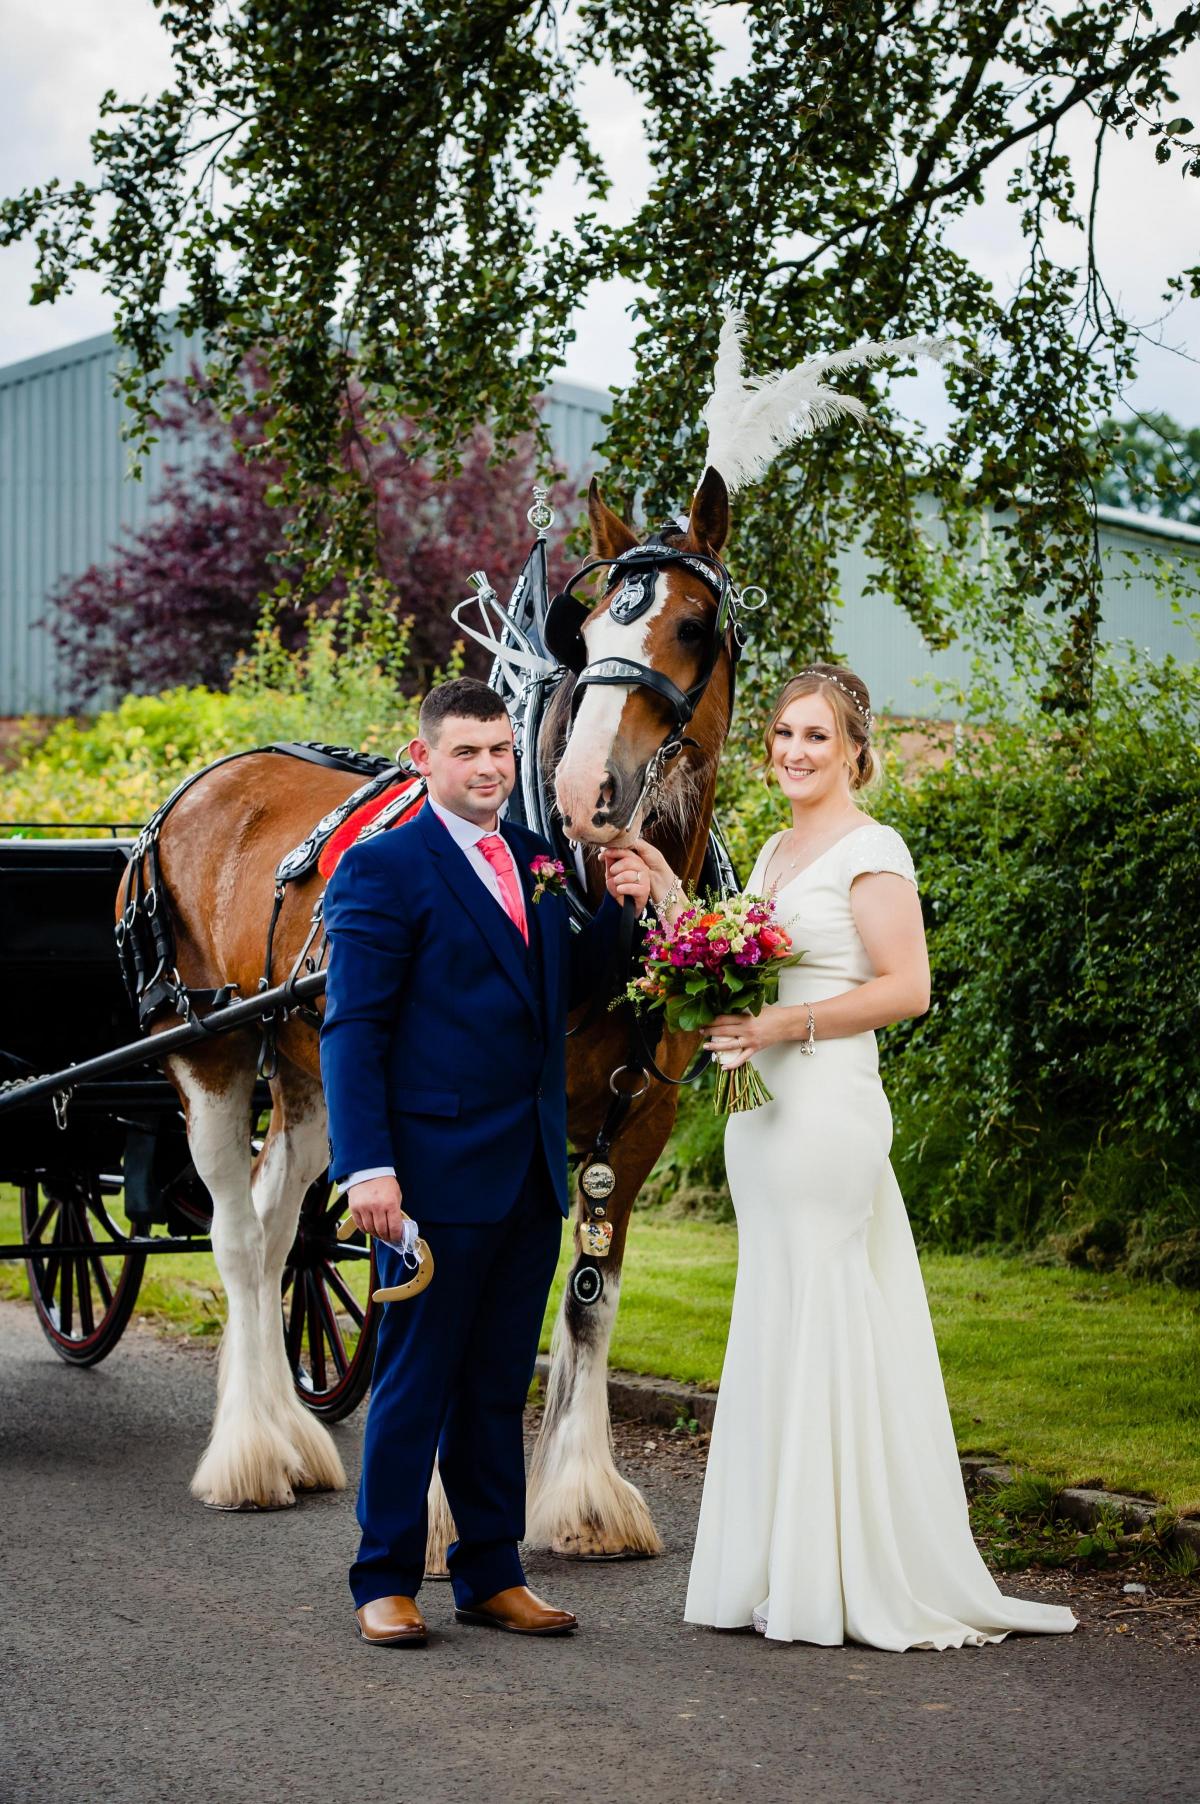 Jennifer Spiers of Drumsagard, Glasgow, married Brendan McKay, of Carnaff, Ballymoney, Co Antrim, at Malcolmwood Farm, Blantyre. The bride was taken to the ceremony by their own Clydesdale mare, Jenny